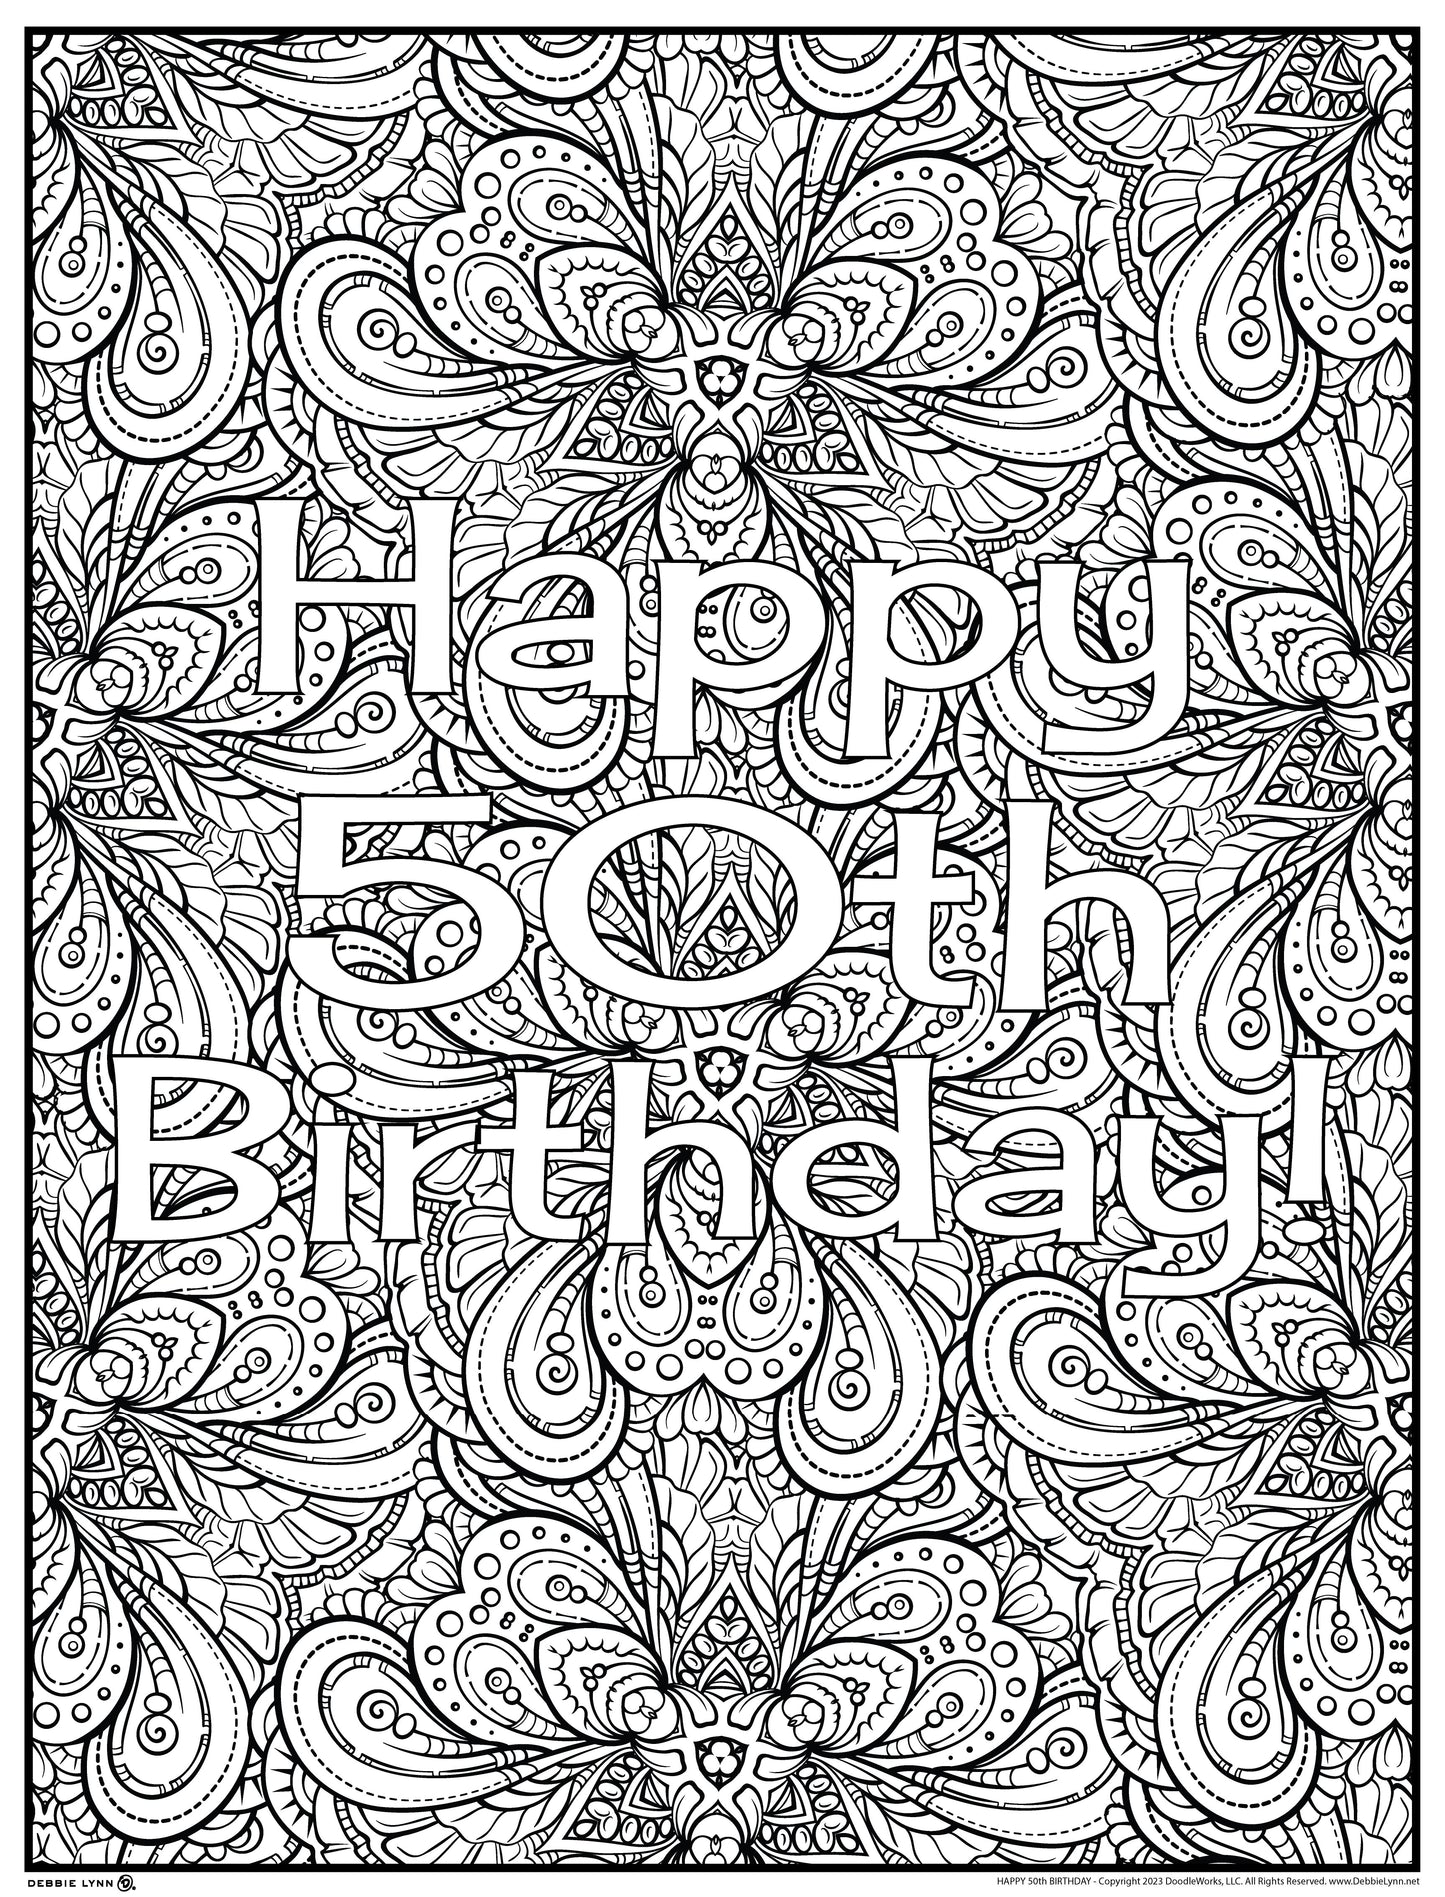 free happy 50th birthday coloring pages